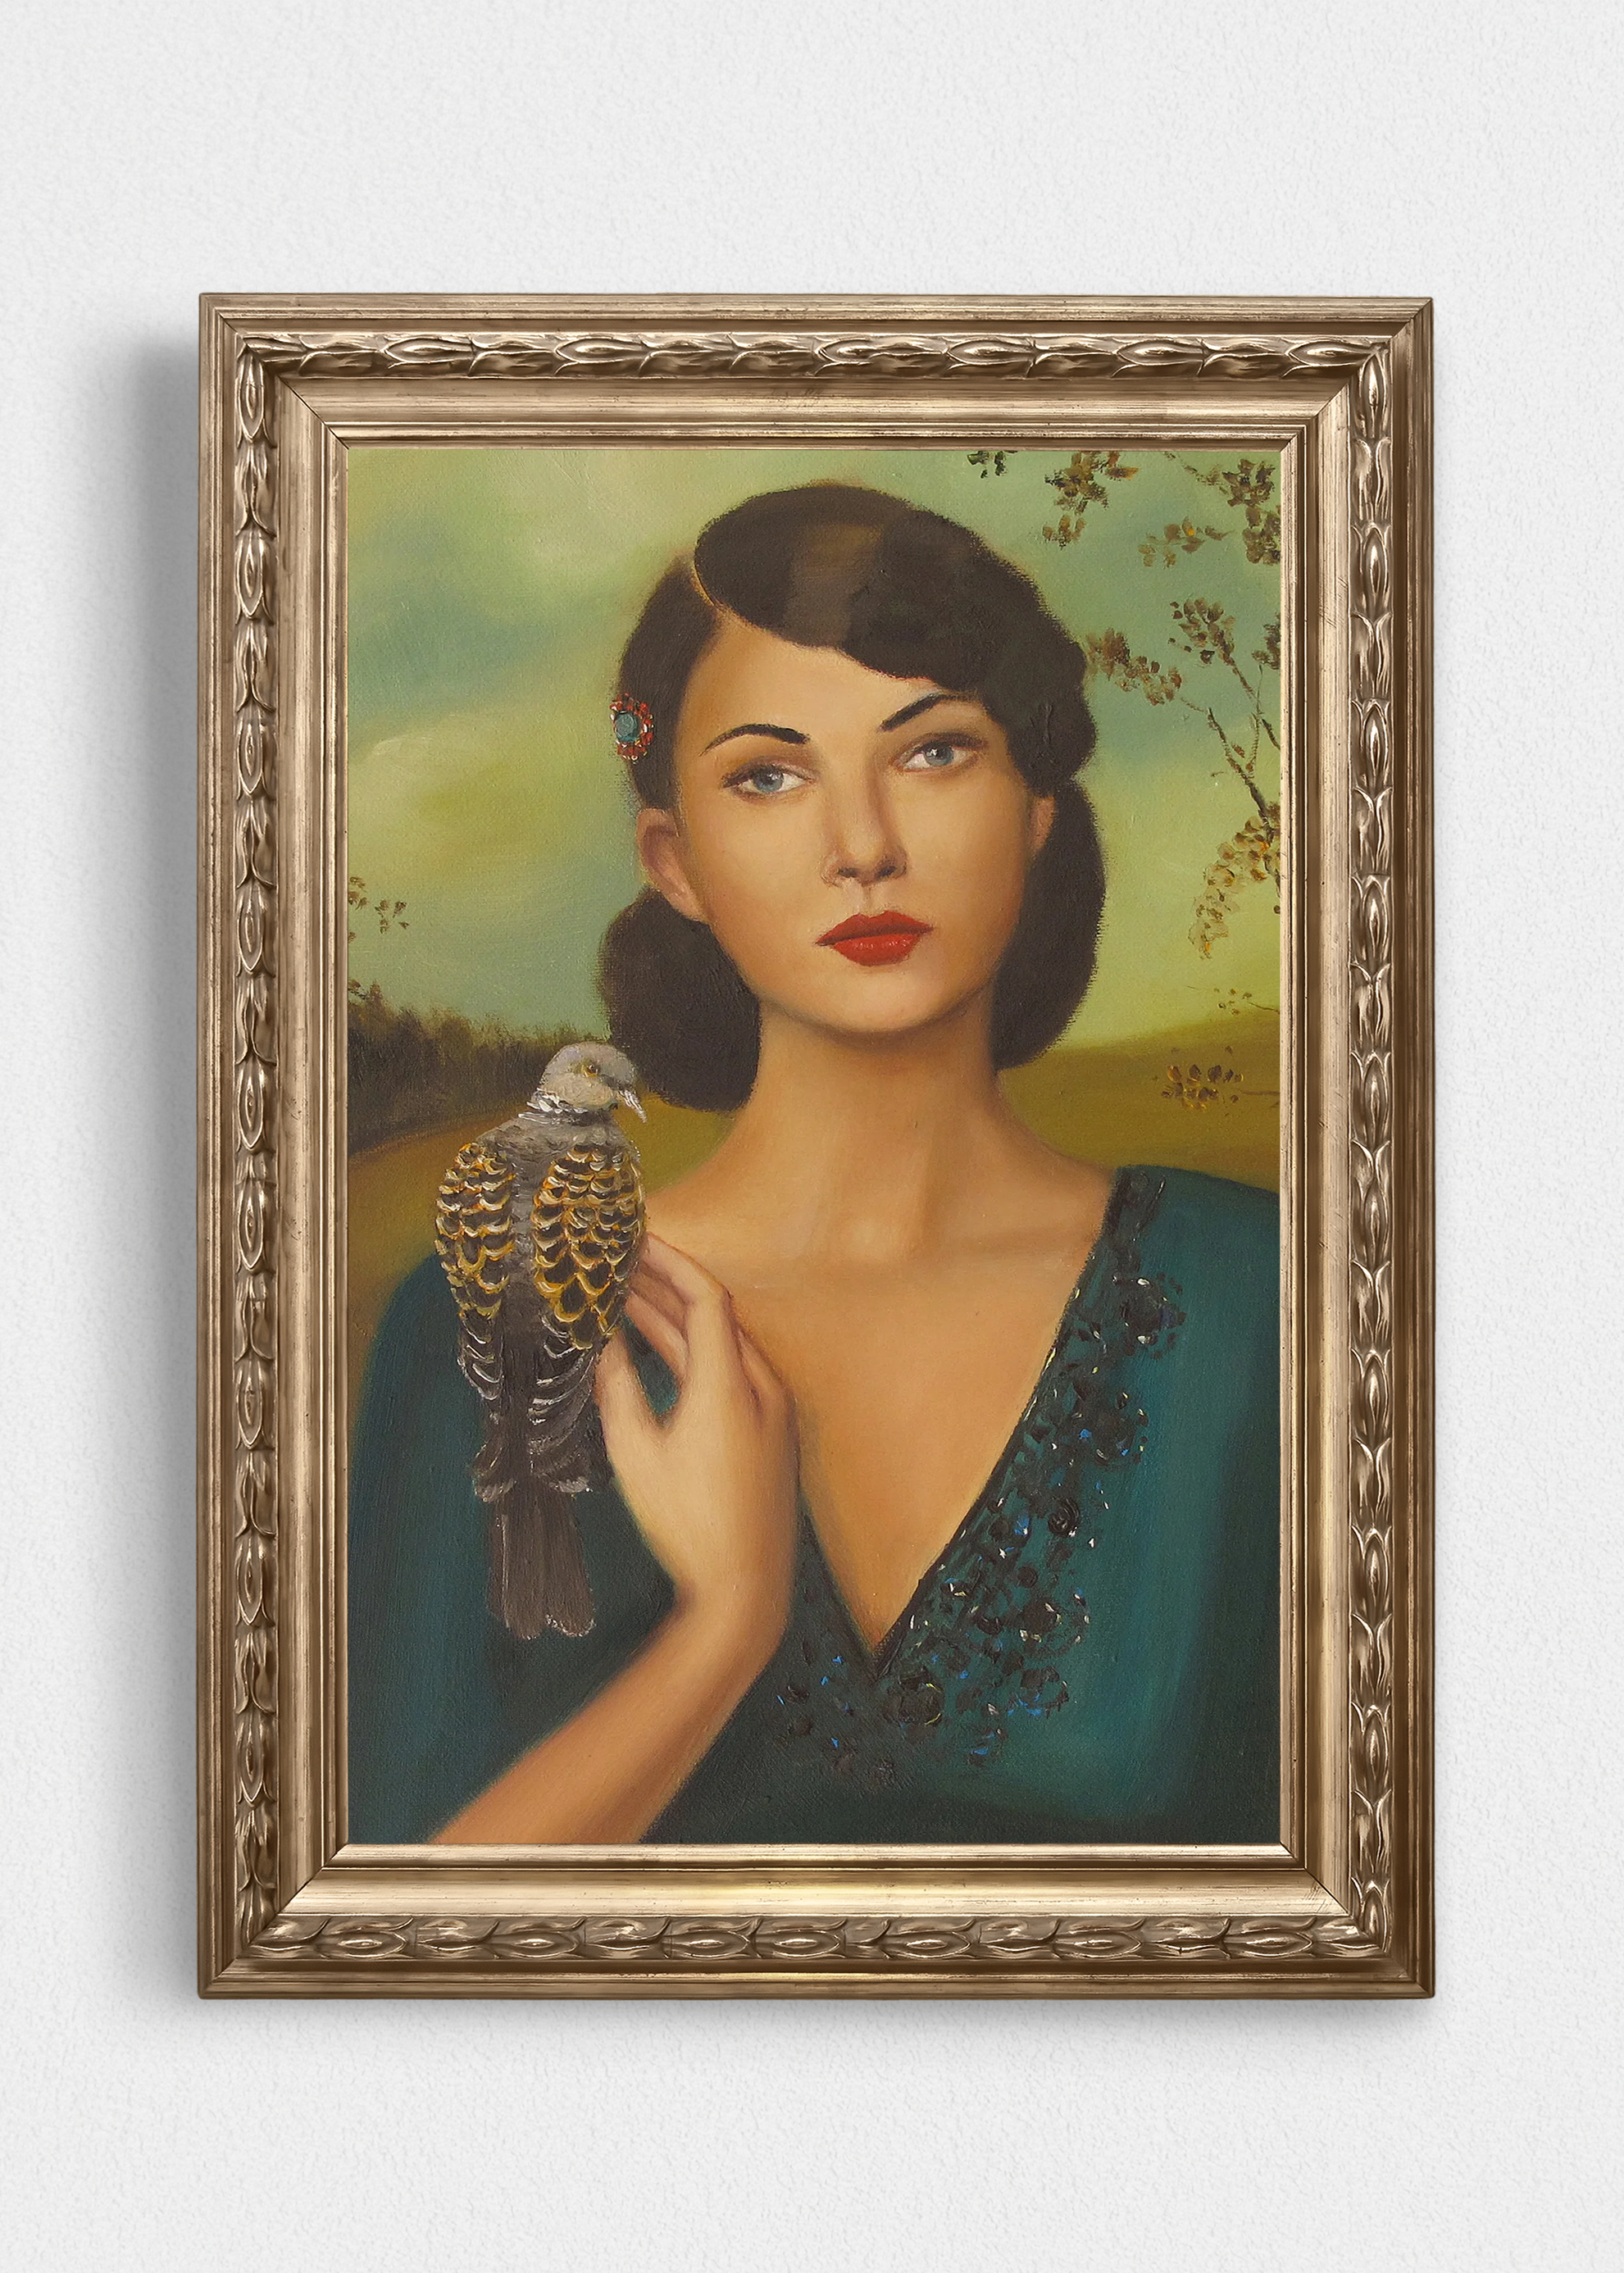 Elspeth with her turtle dove in a gold frame